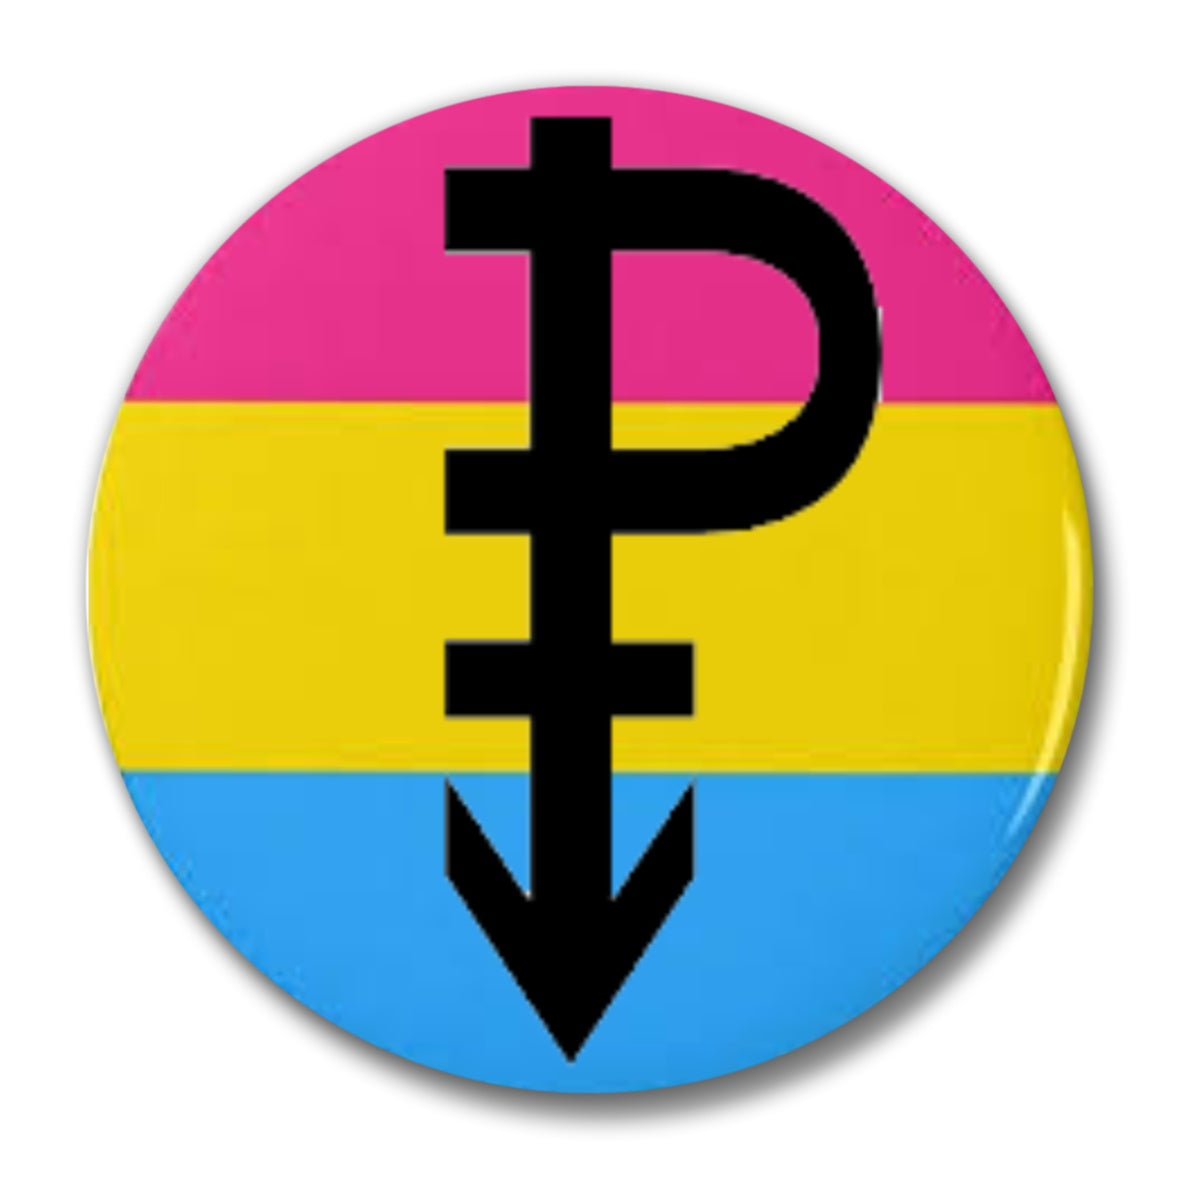 PanSexual